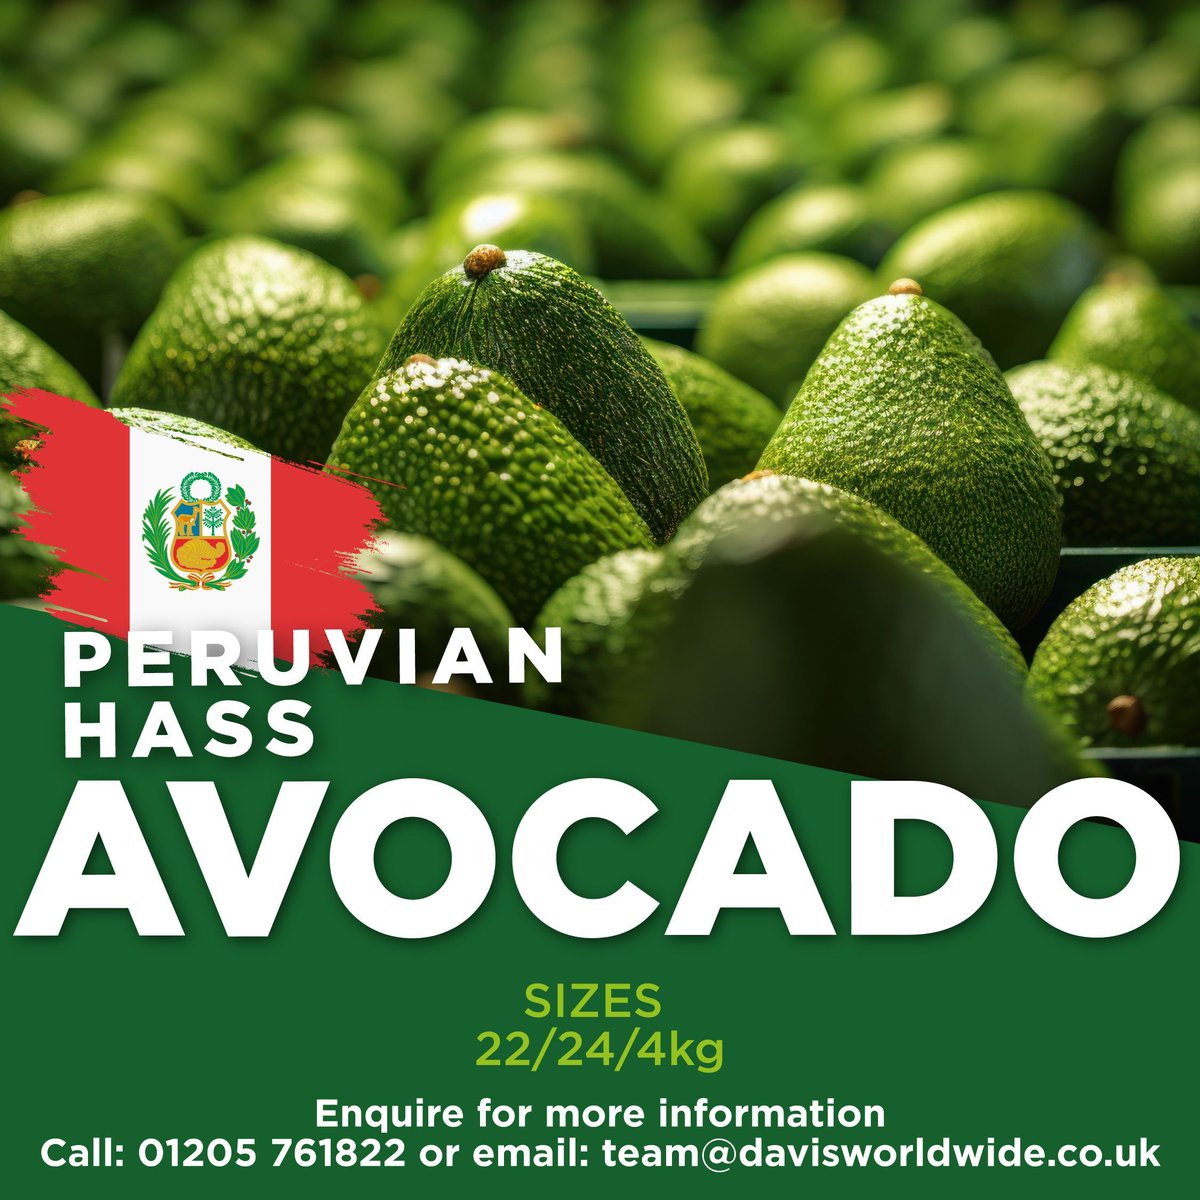 Fresh Peruvian Hass Avocados are now available!

Fruit full of health benefits and a nutritious fruit full of Vitamin E, Vitamin K,Vitamin C and Vitamin B.

Enquire for further information call 01205 761822 or email team@davisworldwide.co.uk

#freshfruits #fruits #vegetables